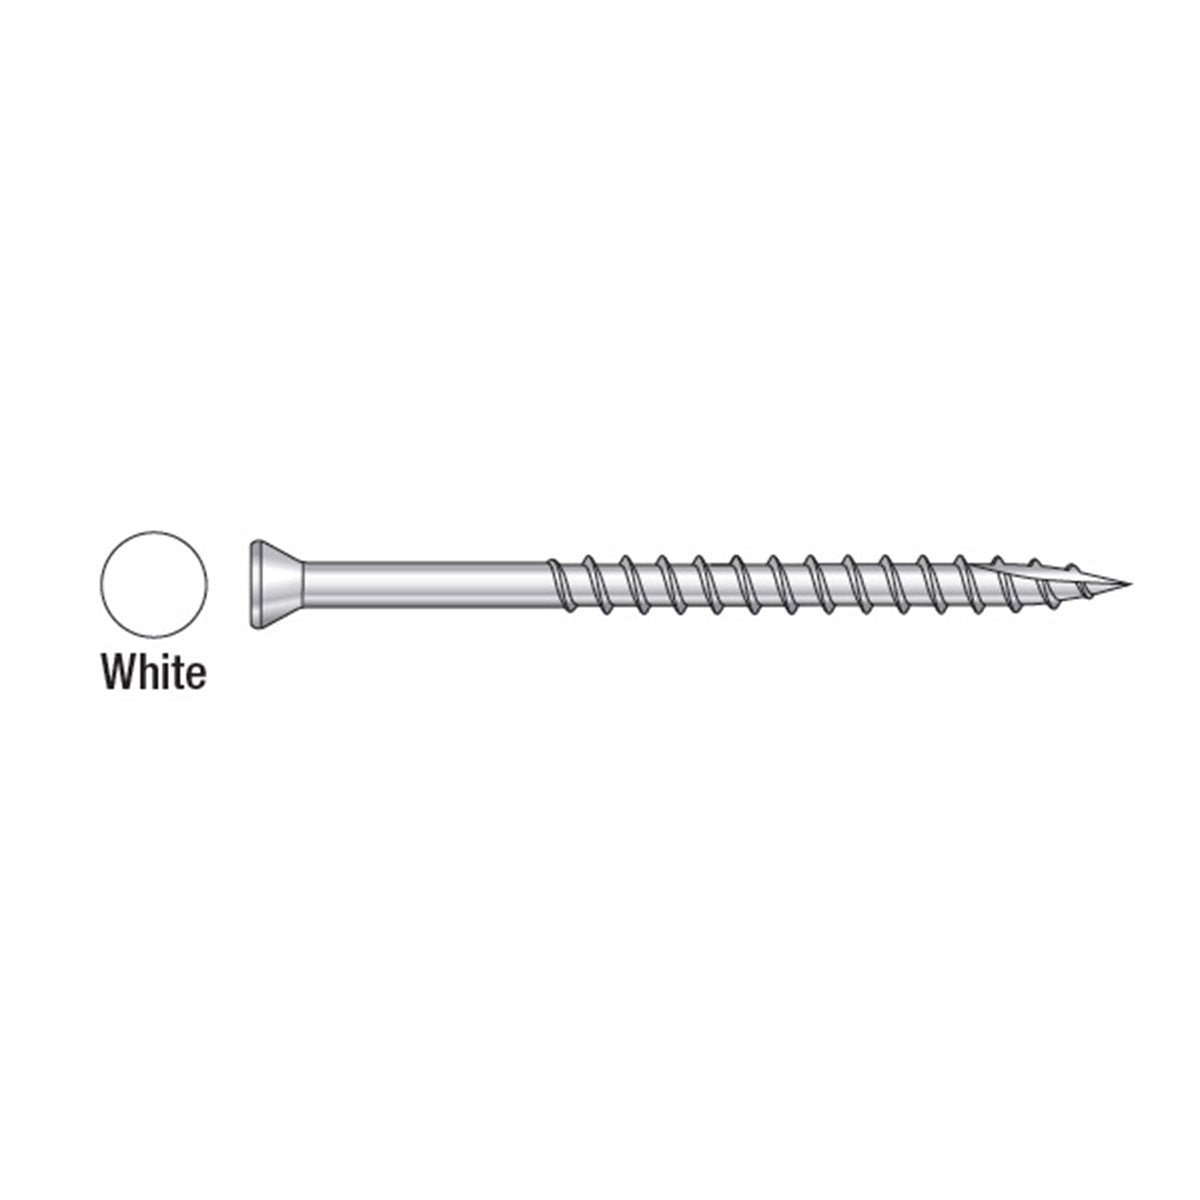 S07162FT70WH01 #7 1-5/8" Type 305 Stainless Steel 6 Lobe Drive Trim Head Screws Painted White - 70-CT Pack